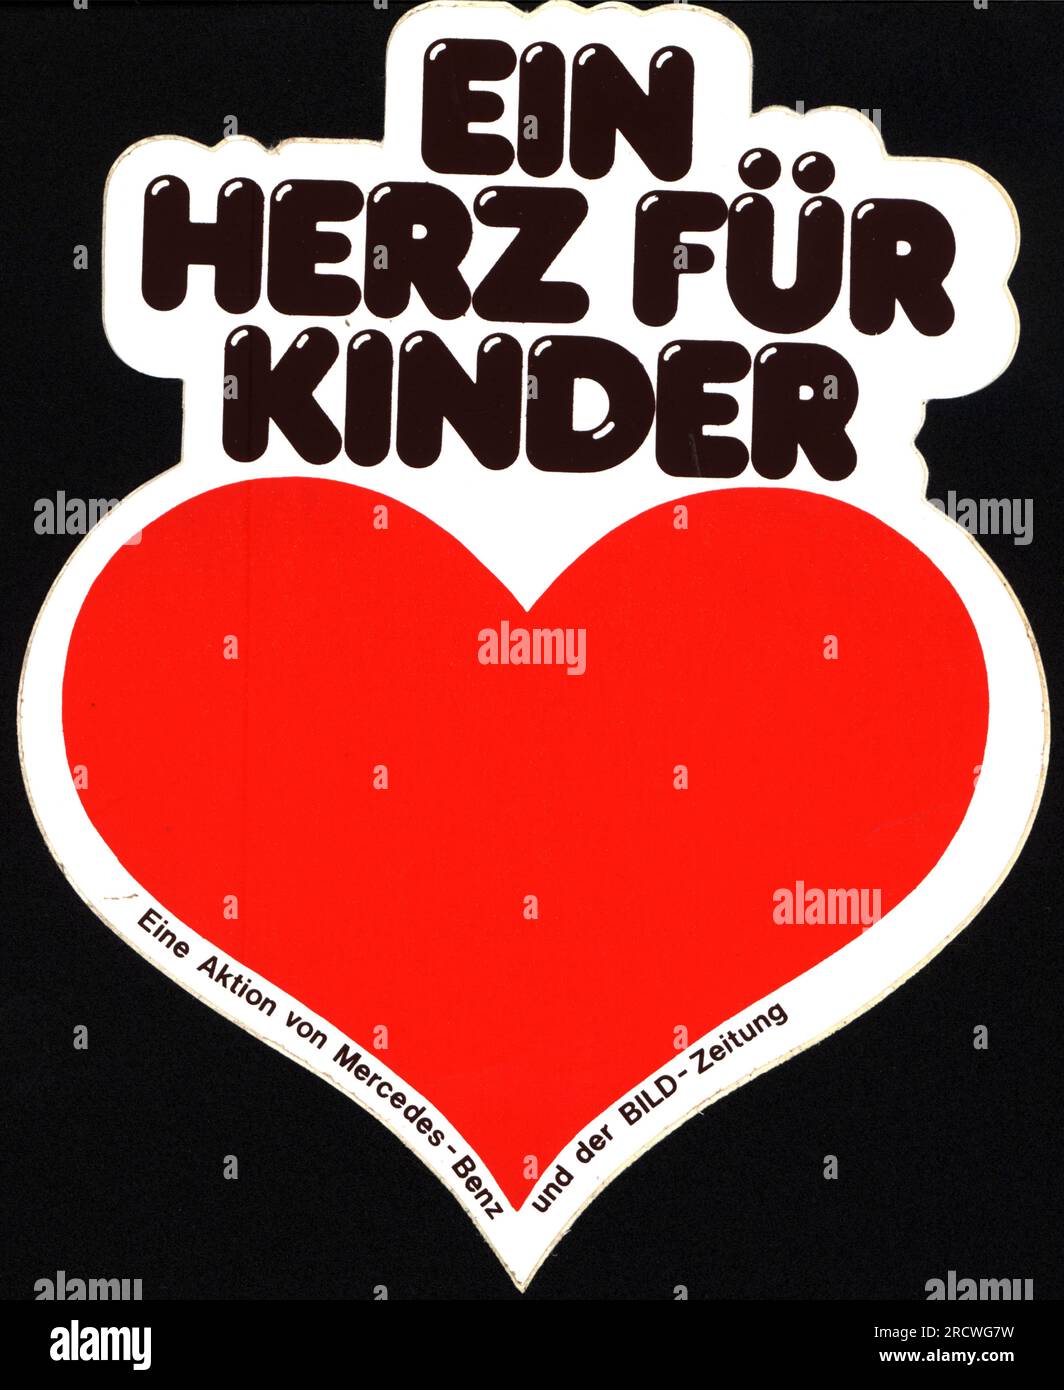 people, society, relief organizations, Ein Herz fuer Kinder (A Heart for Children), ADDITIONAL-RIGHTS-CLEARANCE-INFO-NOT-AVAILABLE Stock Photo